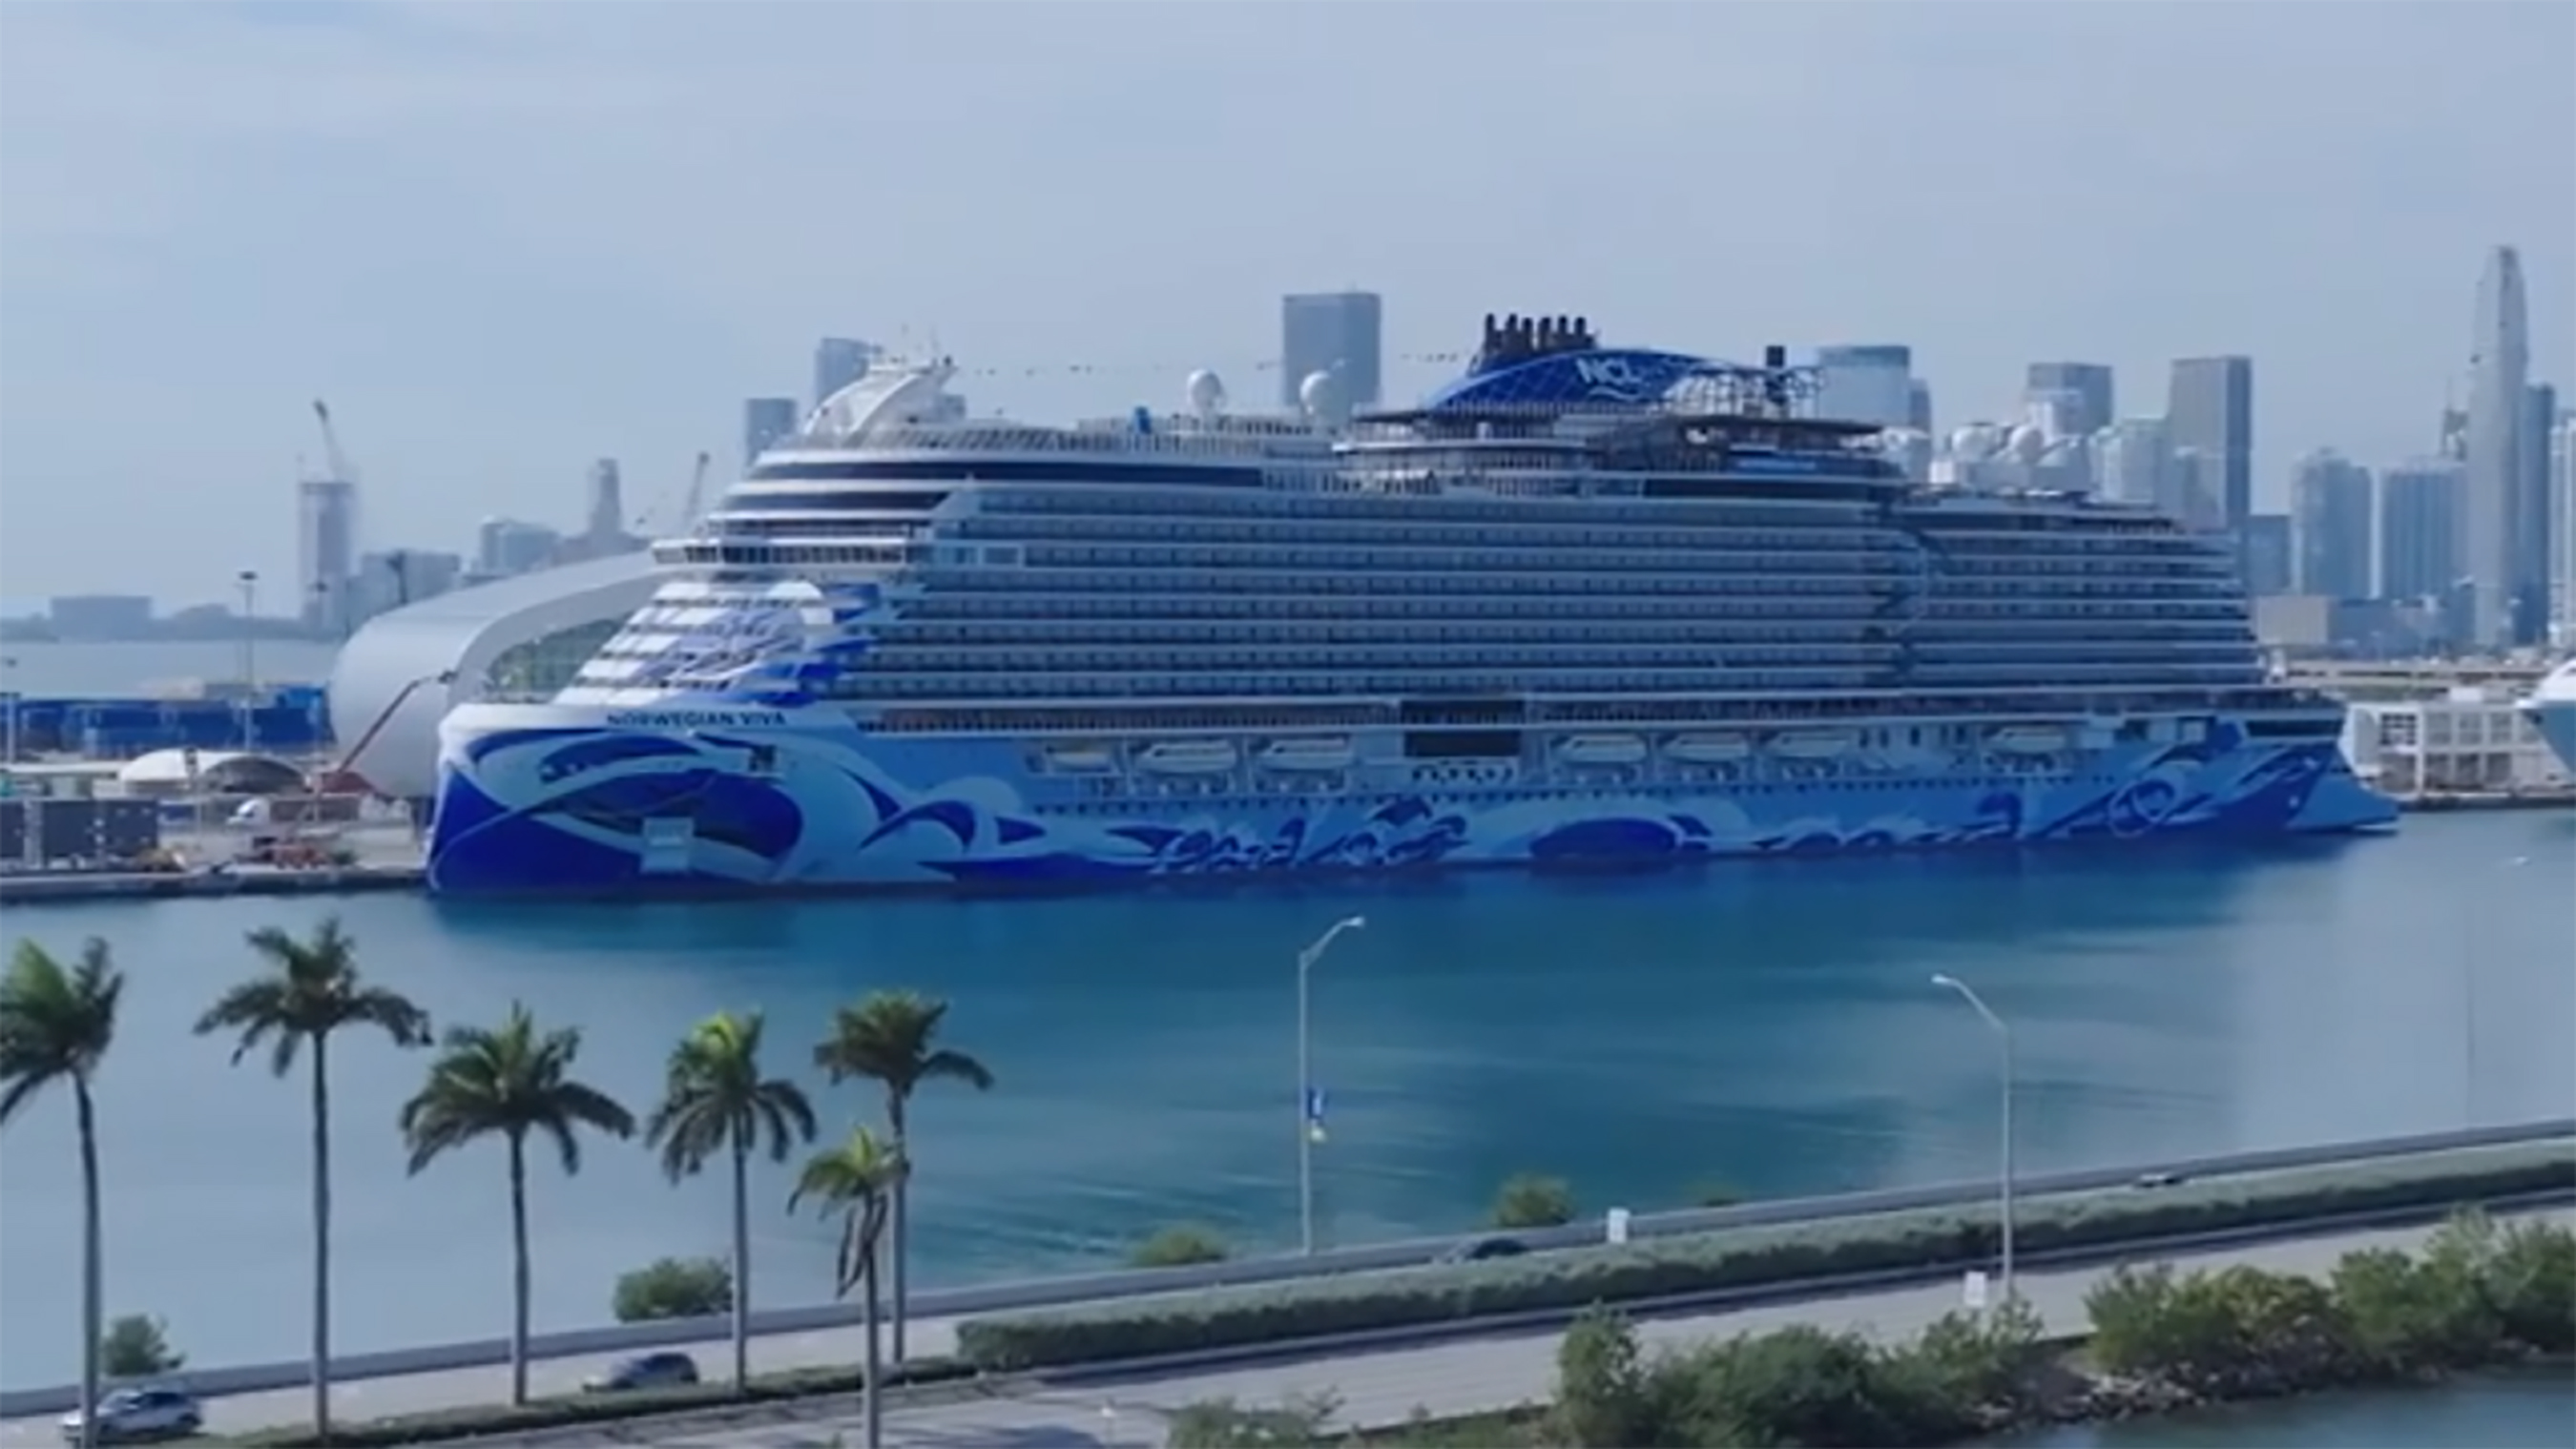 NORWEGIAN CRUISE LINE'S ALL-NEW NORWEGIAN VIVA COMPLETES HER EXCLUSIVE CHRISTENING VOYAGE FOLLOWING A STAR-STUDDED EVENT IN MIAMI